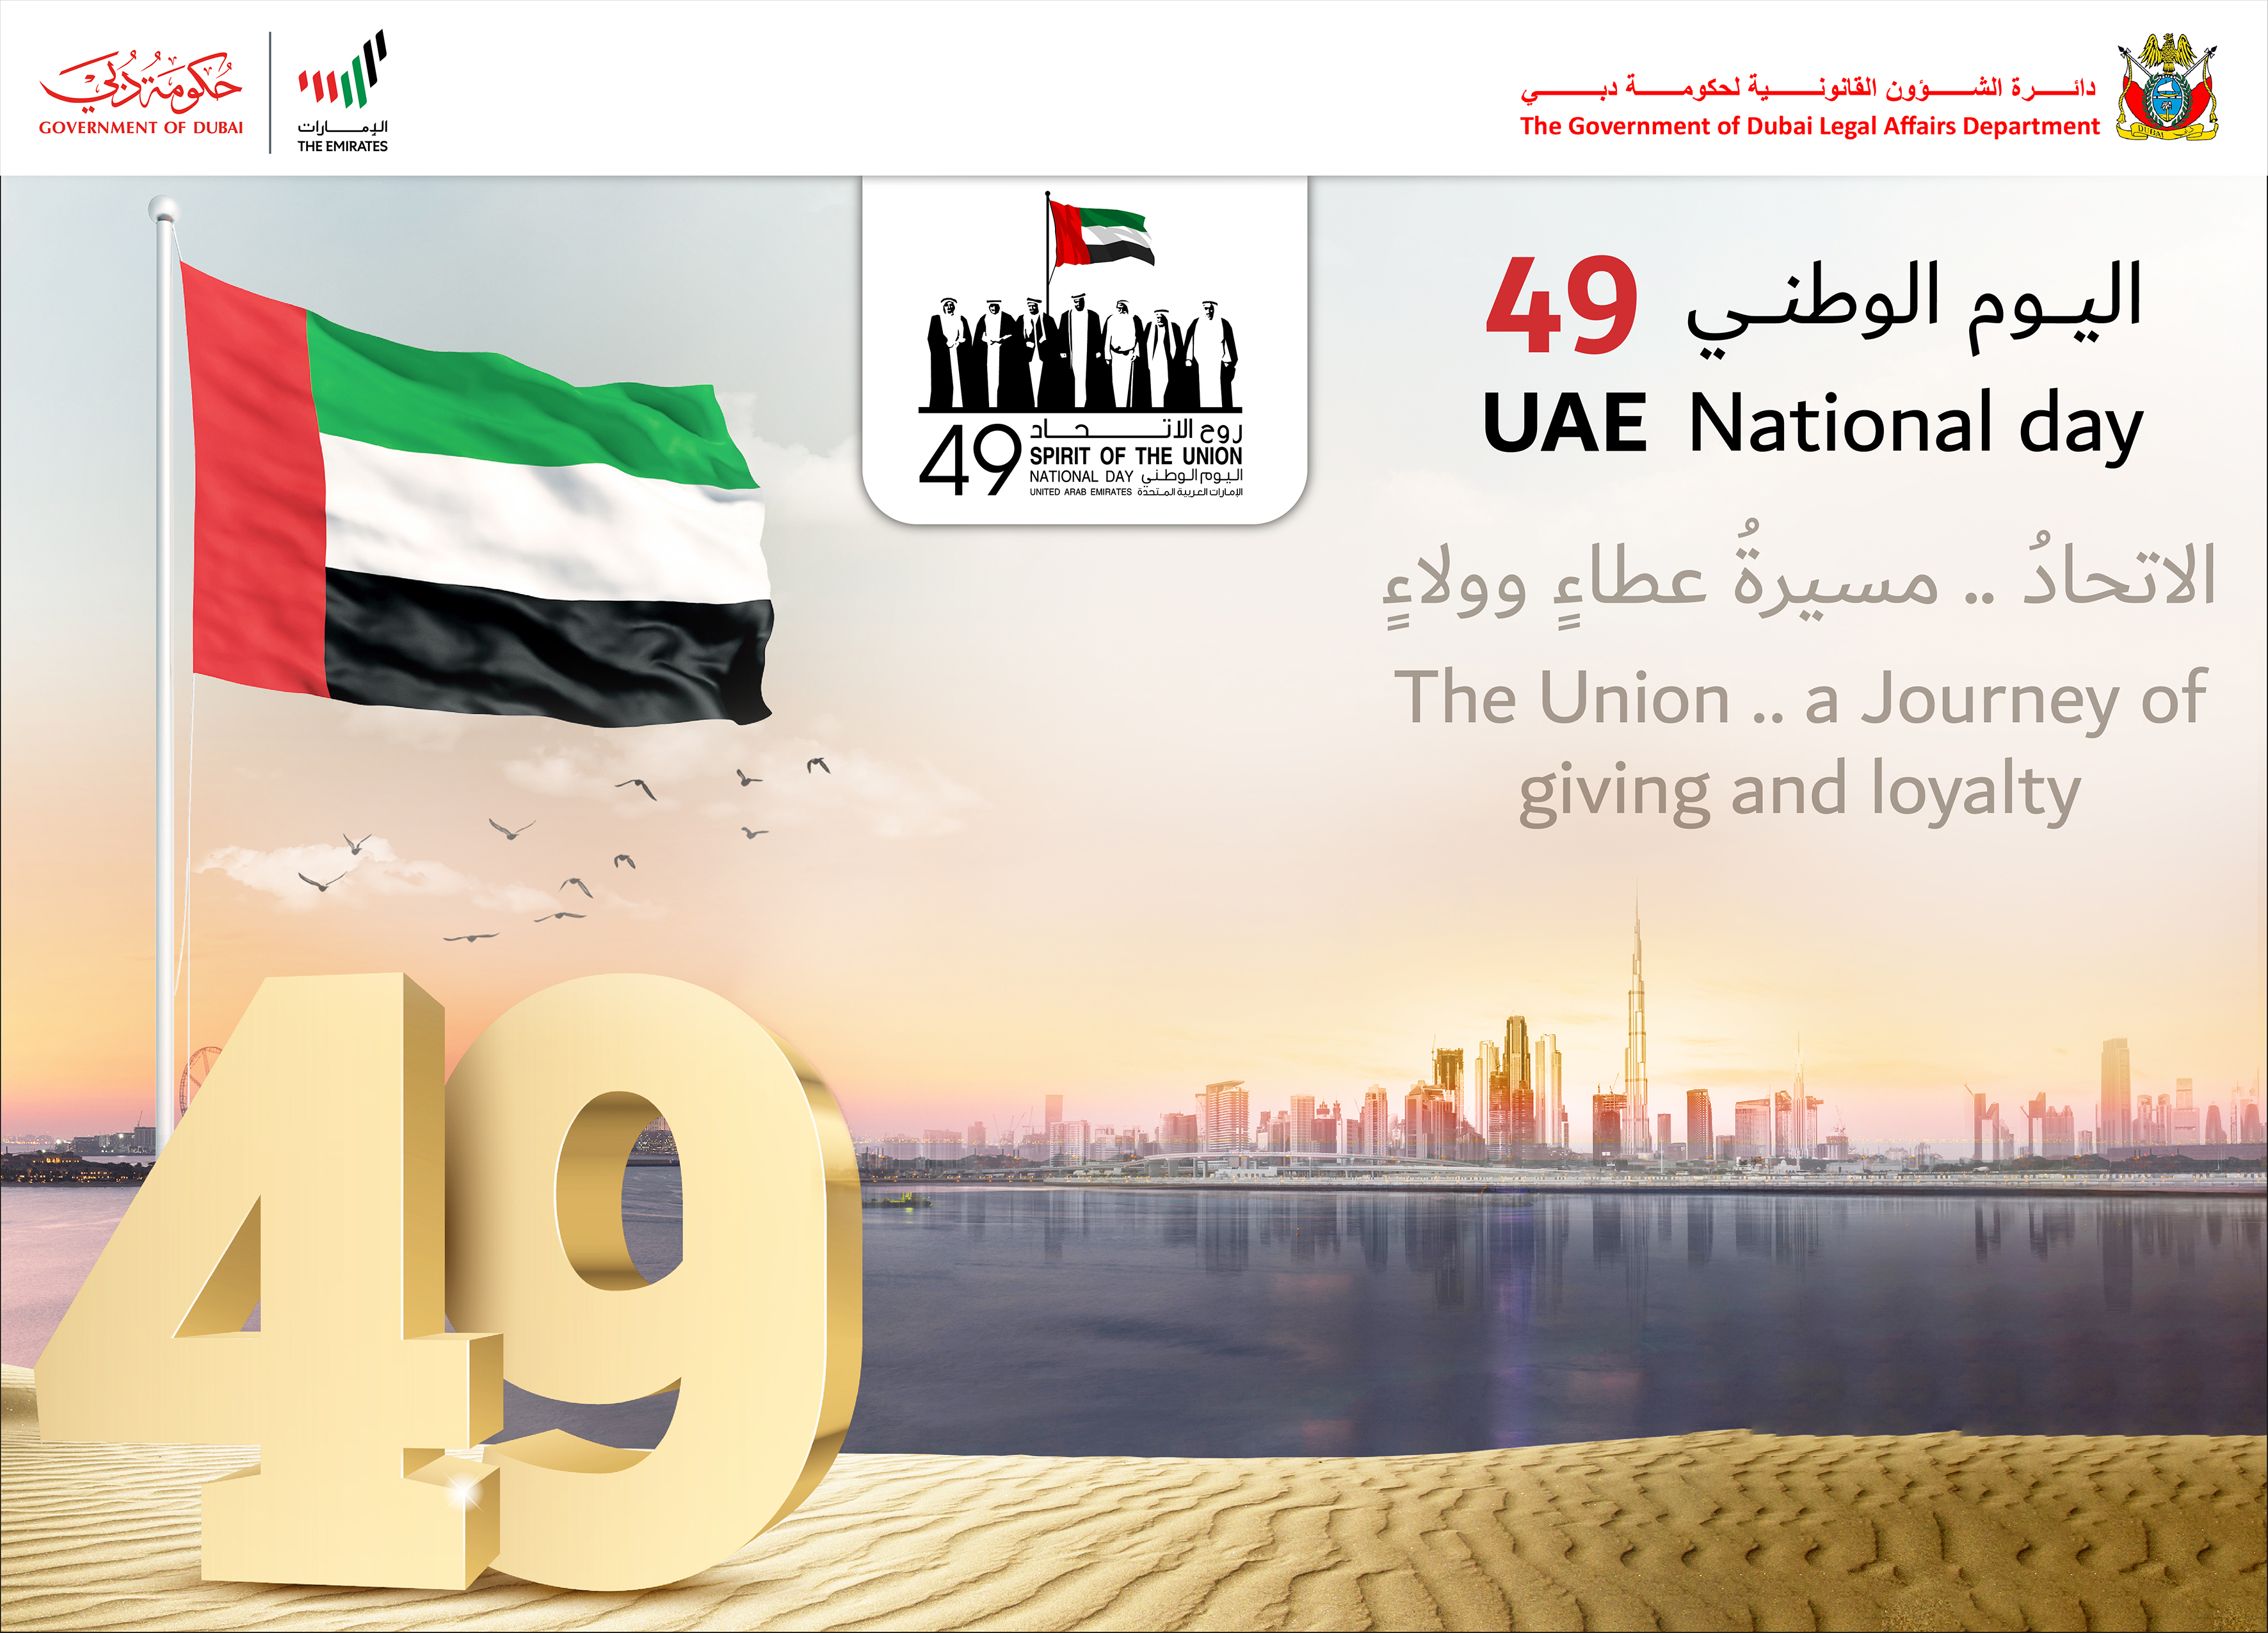 Statement by His Excellency Dr. Lowai Mohamed Belhoul, Director General of the Government of Dubai Legal Affairs Department on the Occasion of the UAE’s 49th  National Day